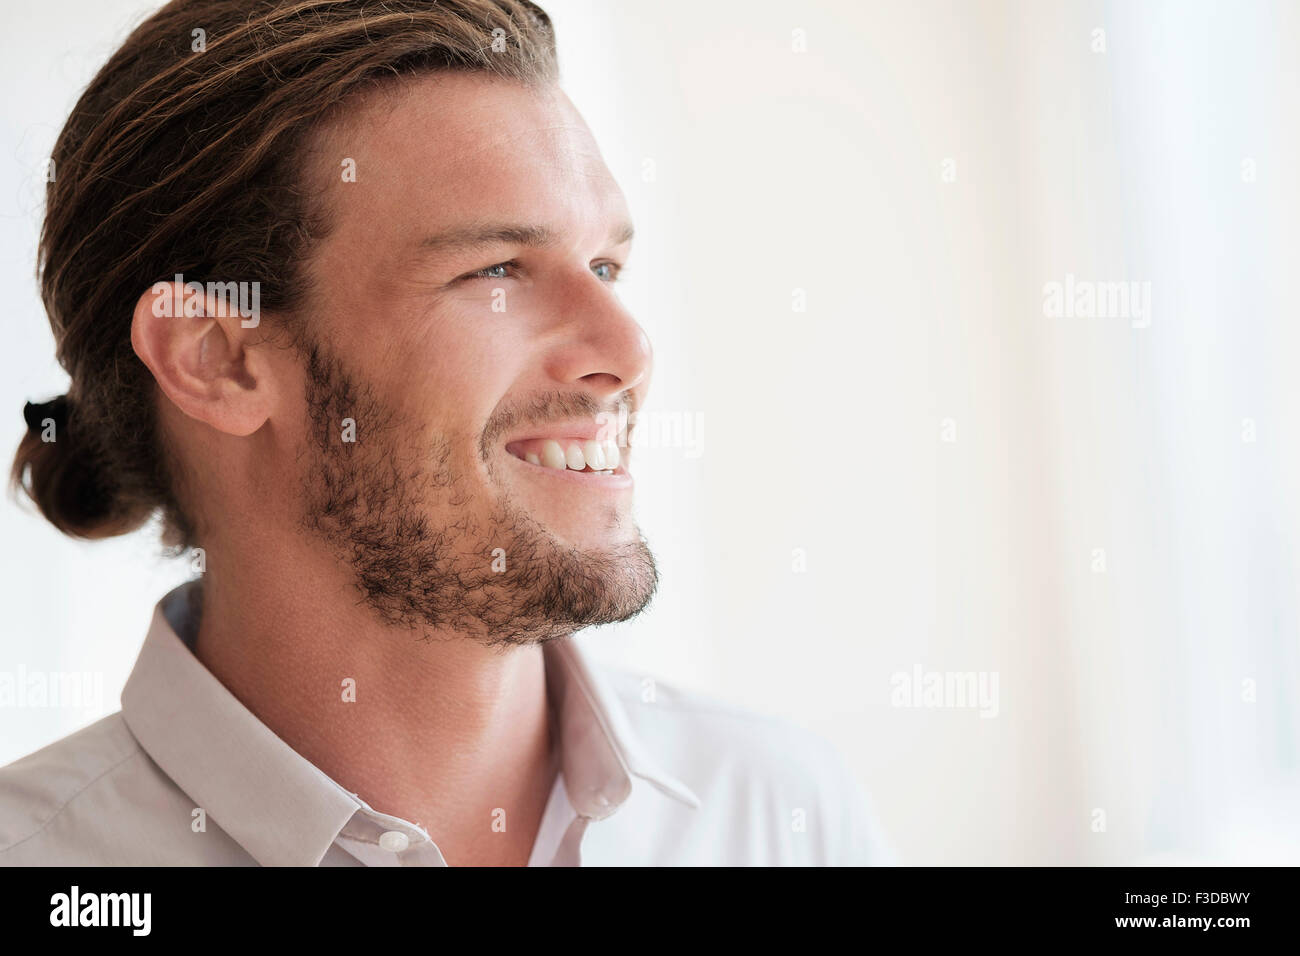 Mid-adult man laughing Stock Photo